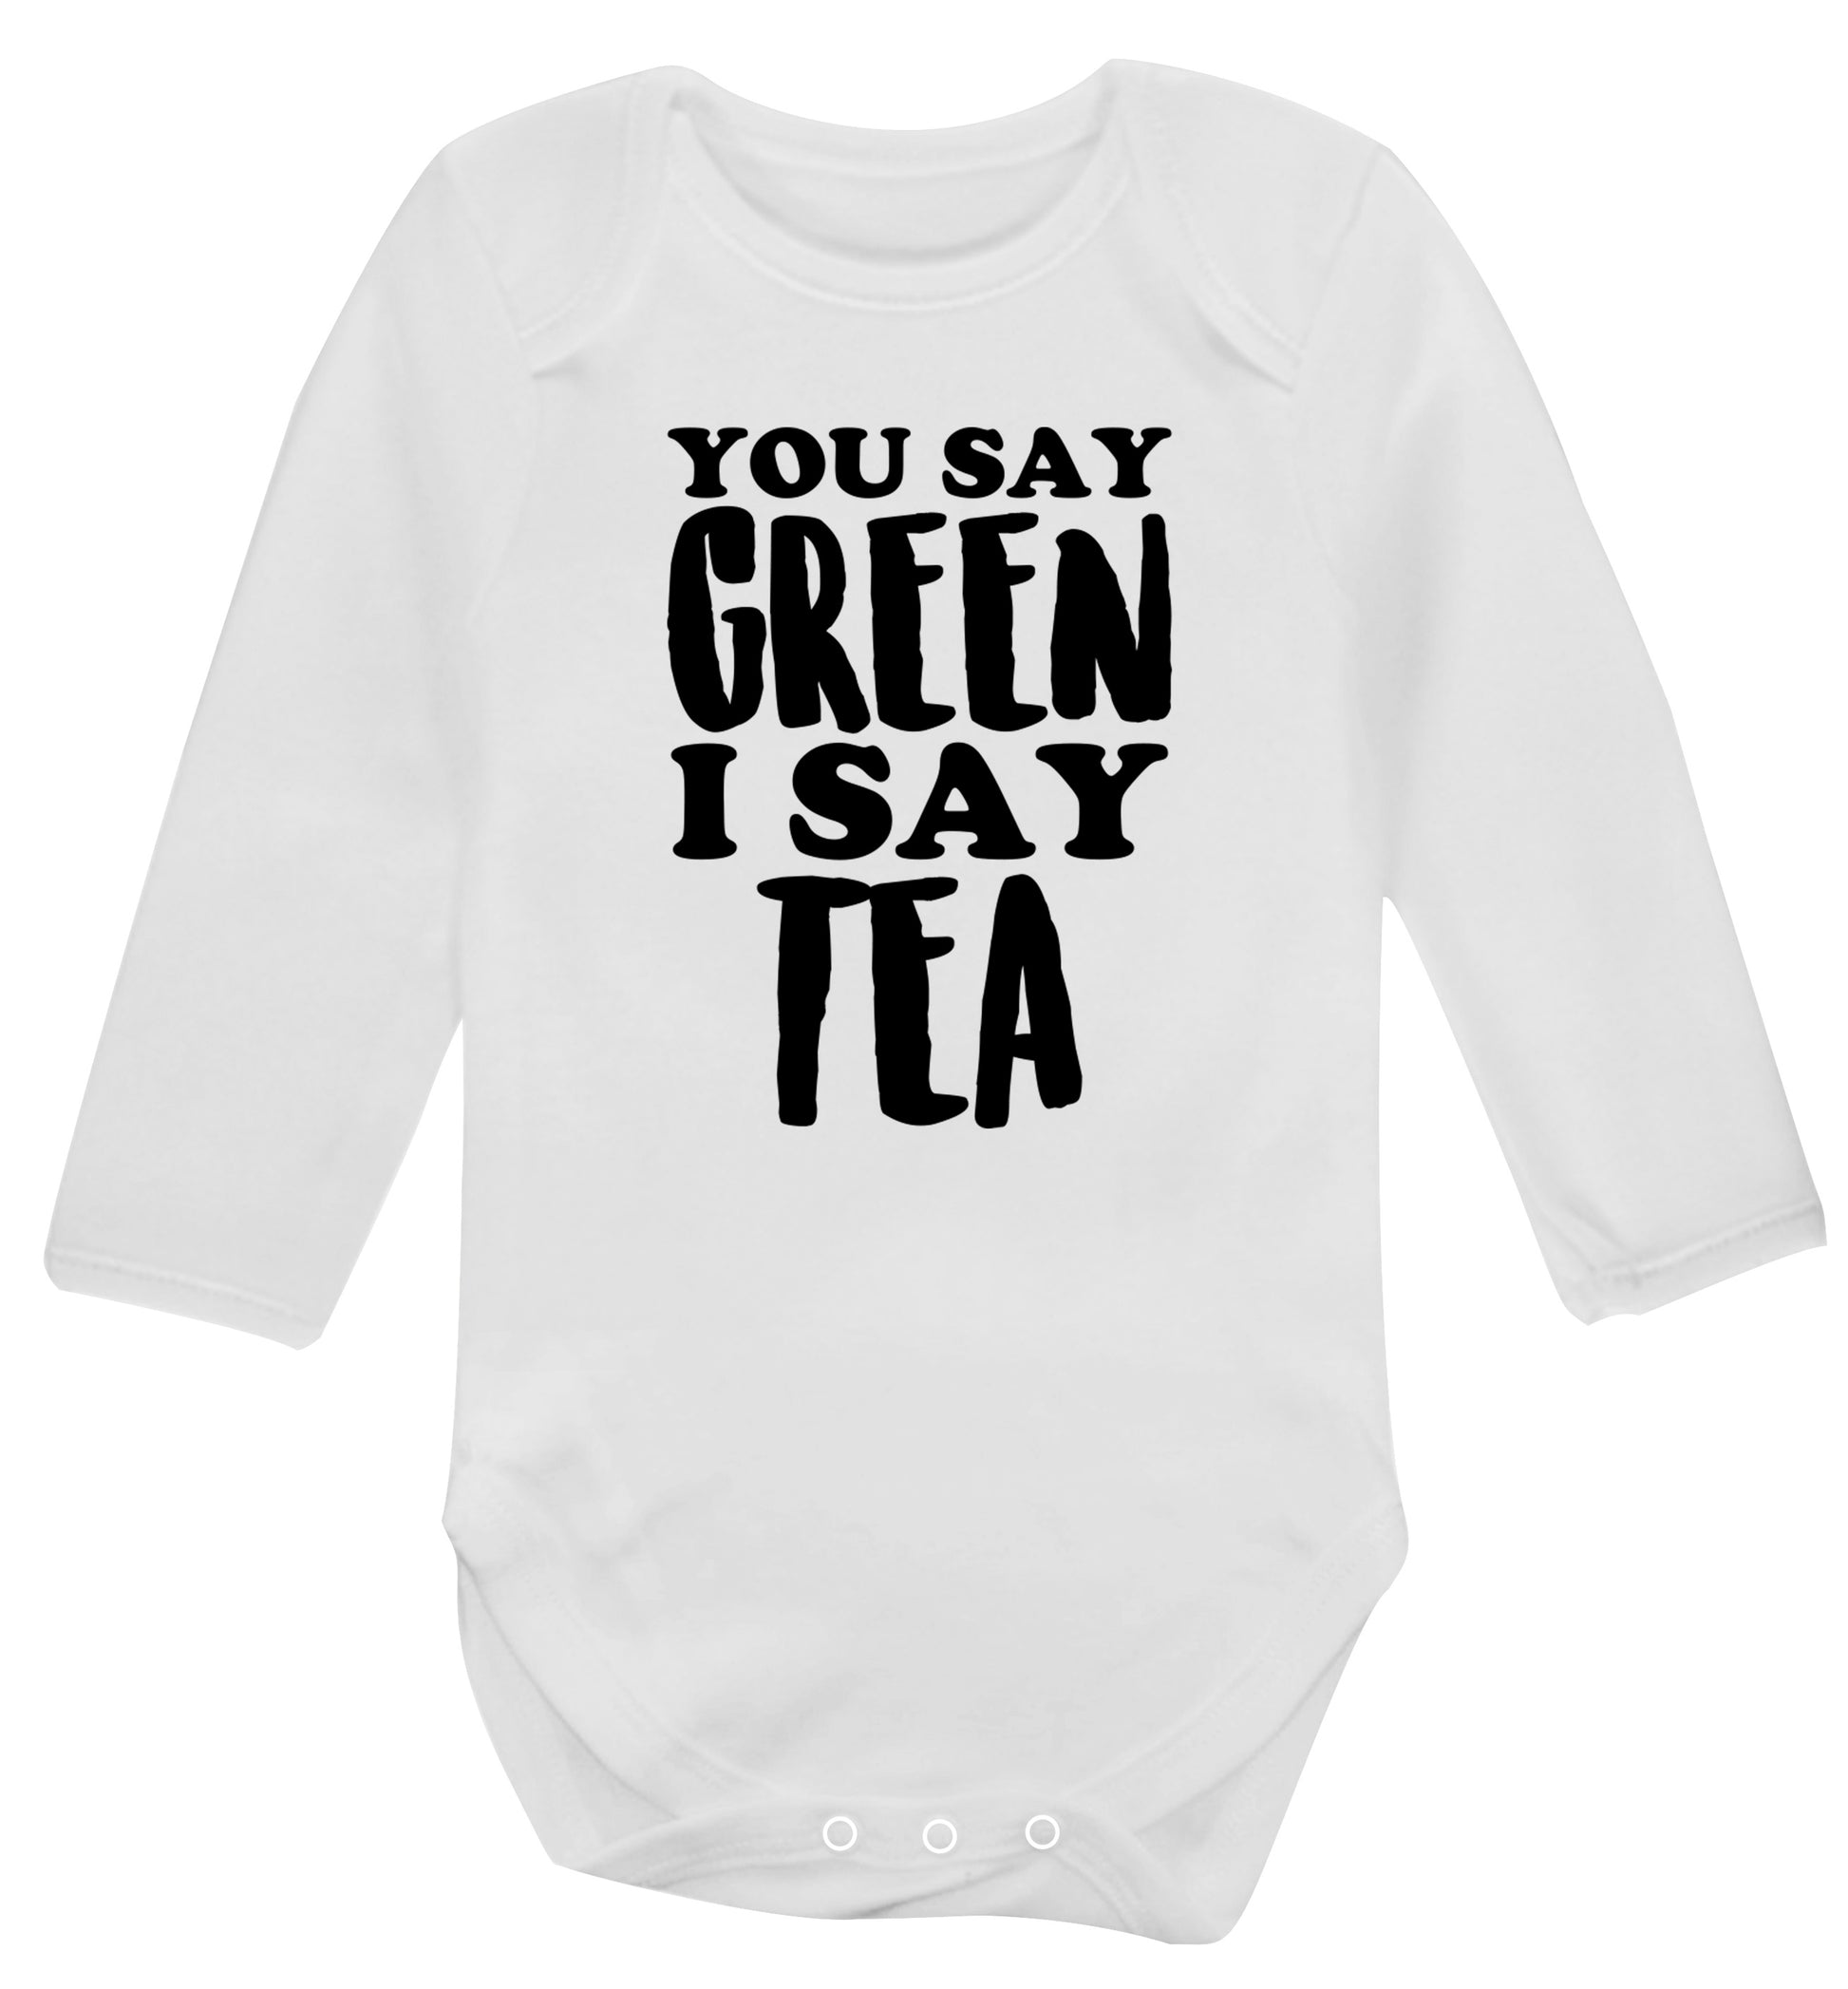 You say green I say tea! Baby Vest long sleeved white 6-12 months